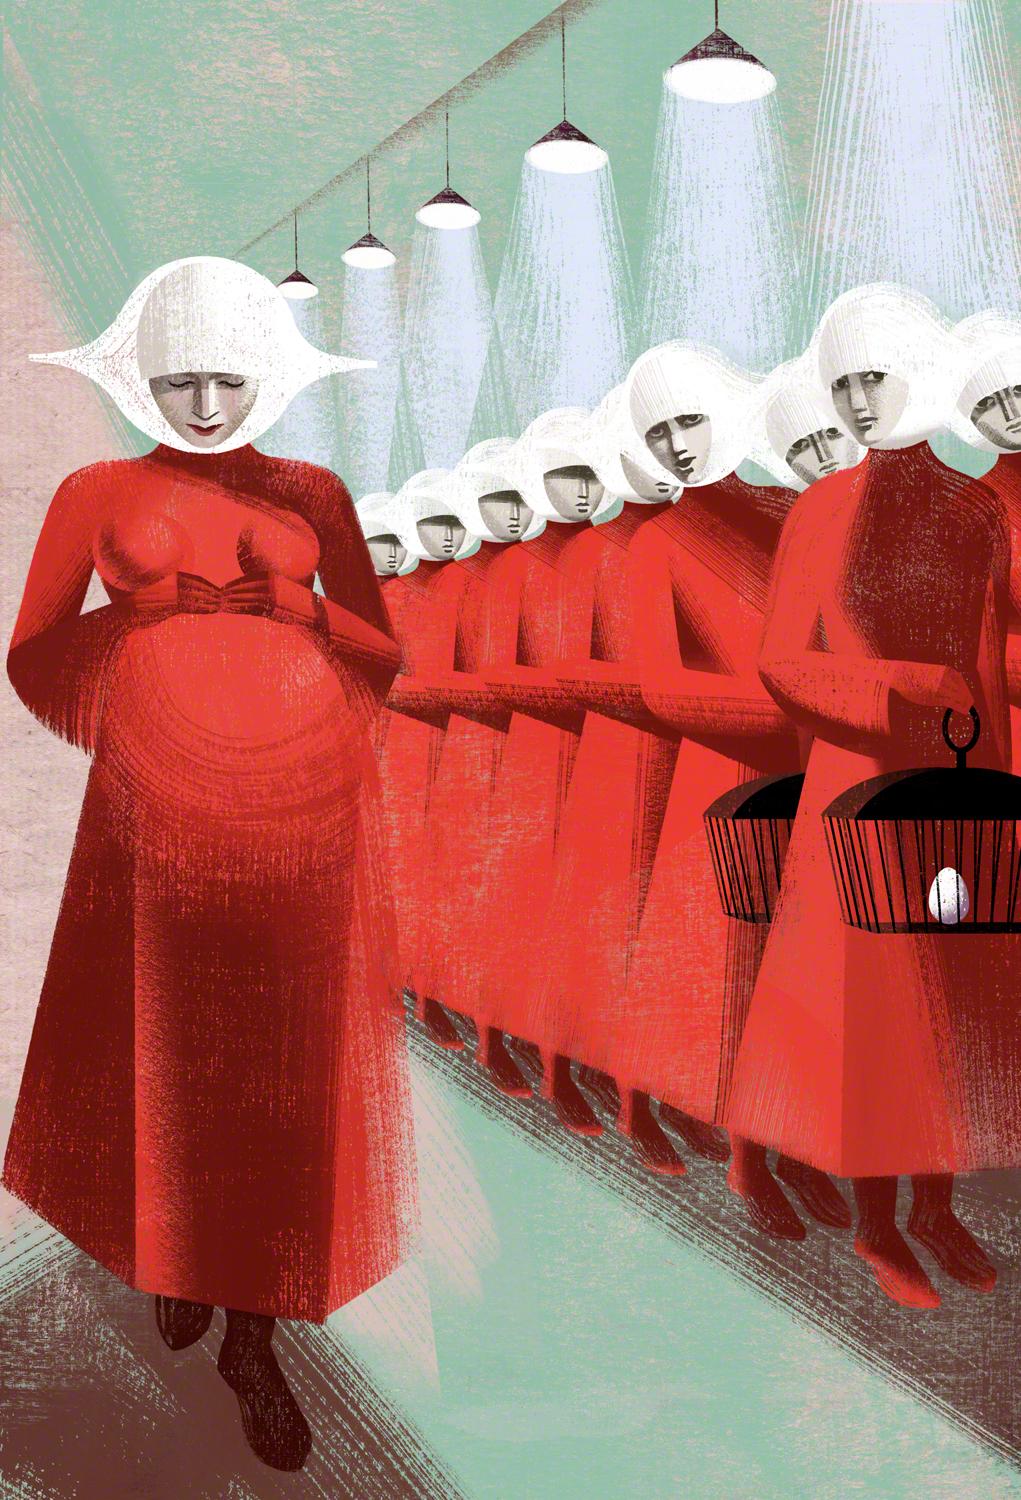 The Handmaid's Tale by Margaret Atwood  book